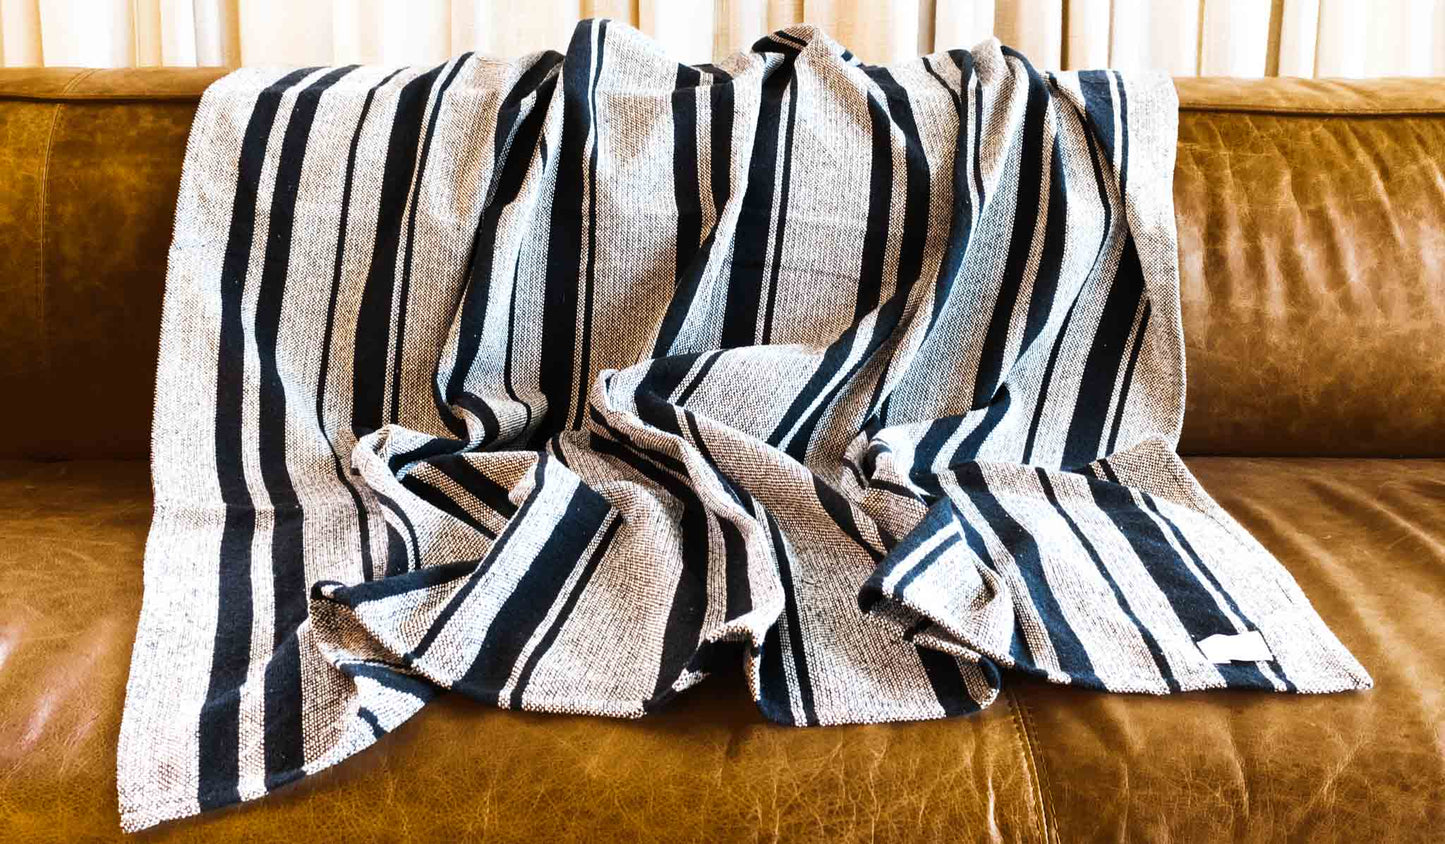 Cotton throw blanket with sand and black stripes on leather sofa.